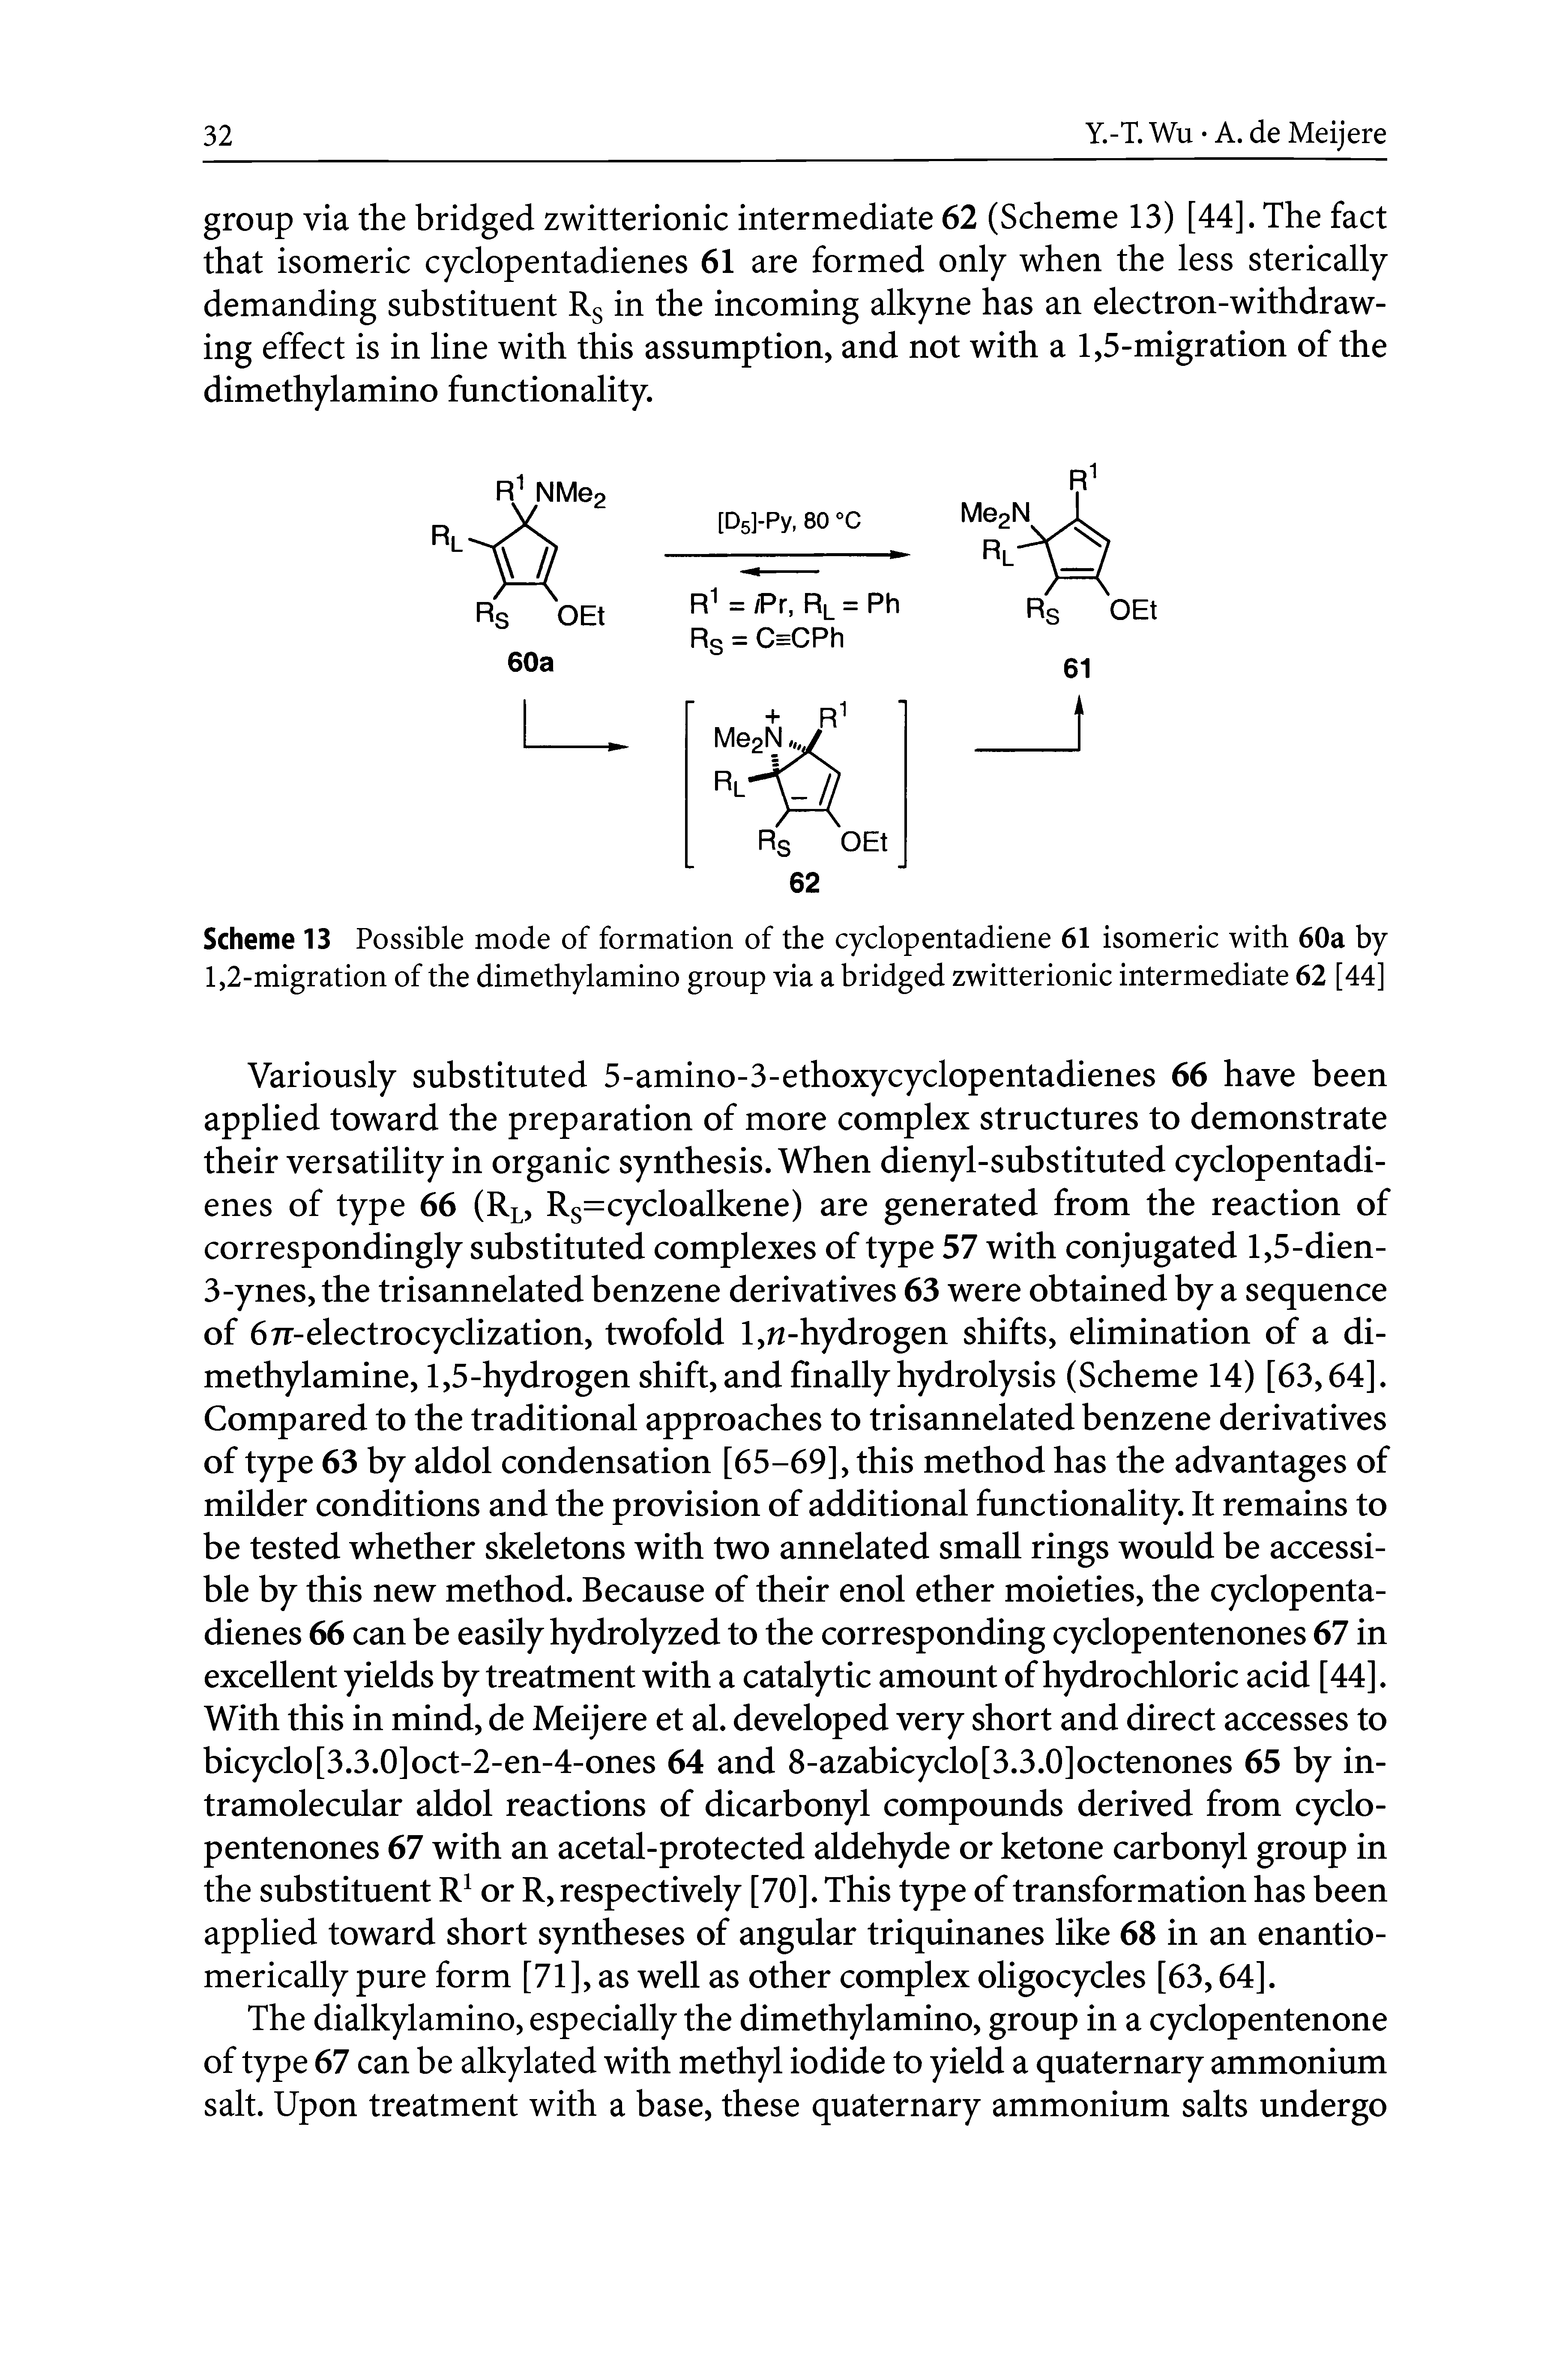 Scheme 13 Possible mode of formation of the cyclopentadiene 61 isomeric with 60a by 1,2-migration of the dimethylamino group via a bridged zwitterionic intermediate 62 [44]...